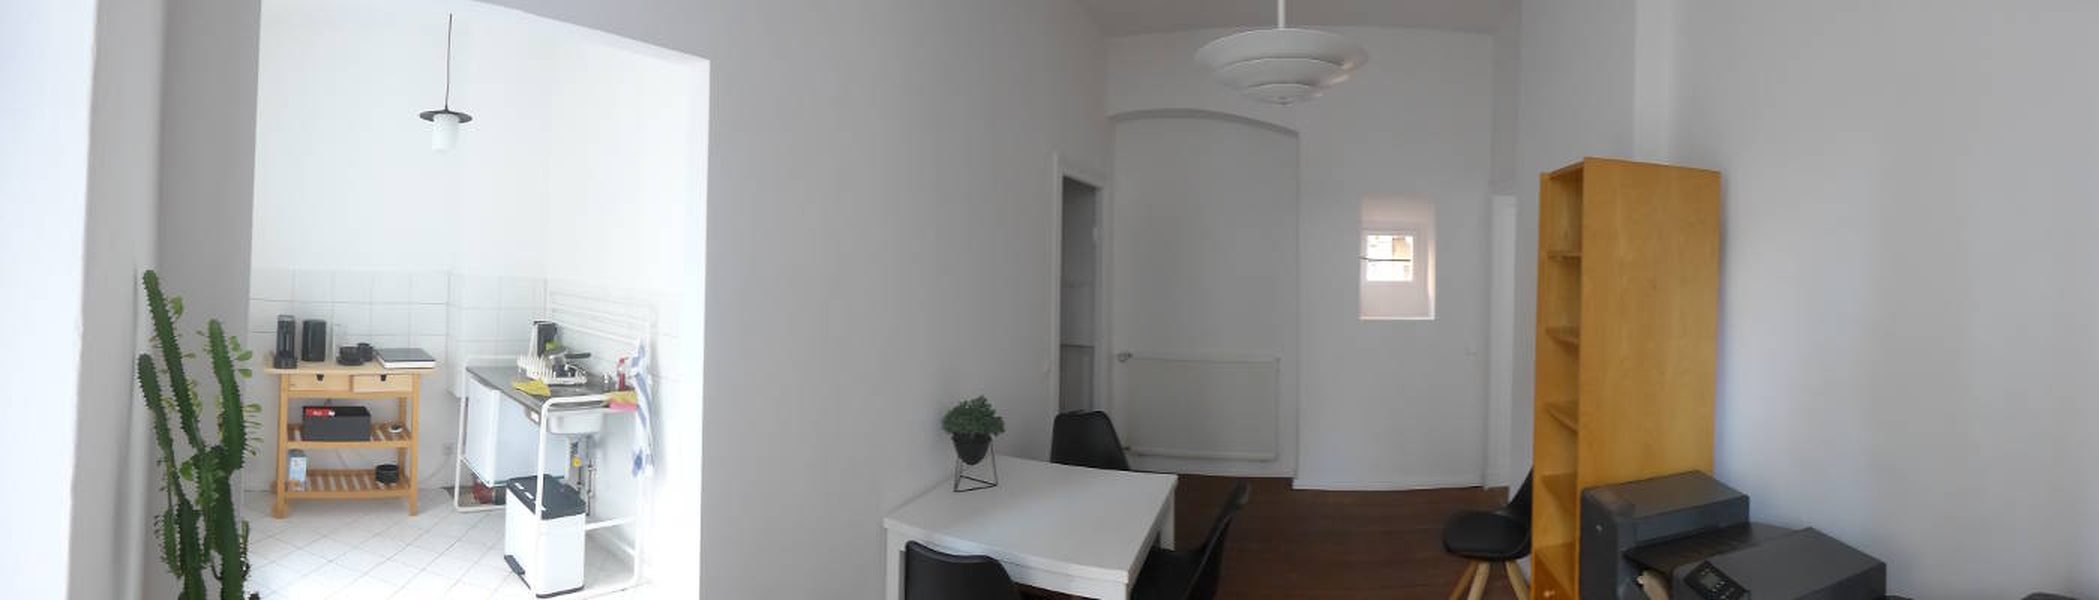 CoWorking office close to Rathaus Pankow